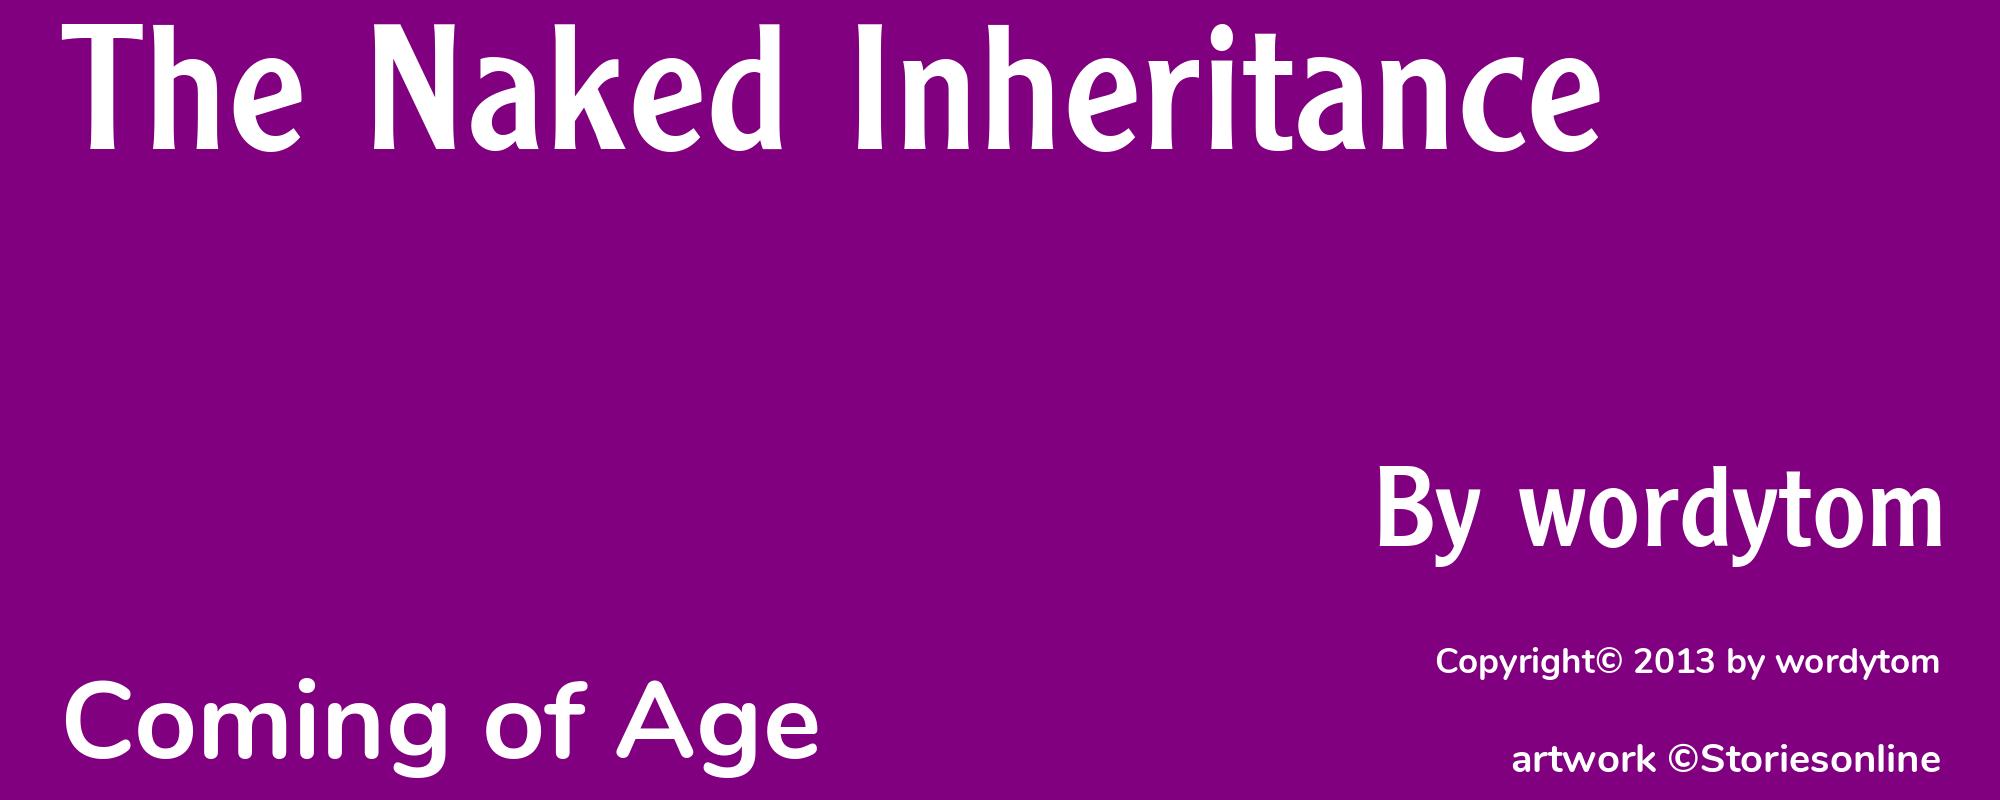 The Naked Inheritance - Cover